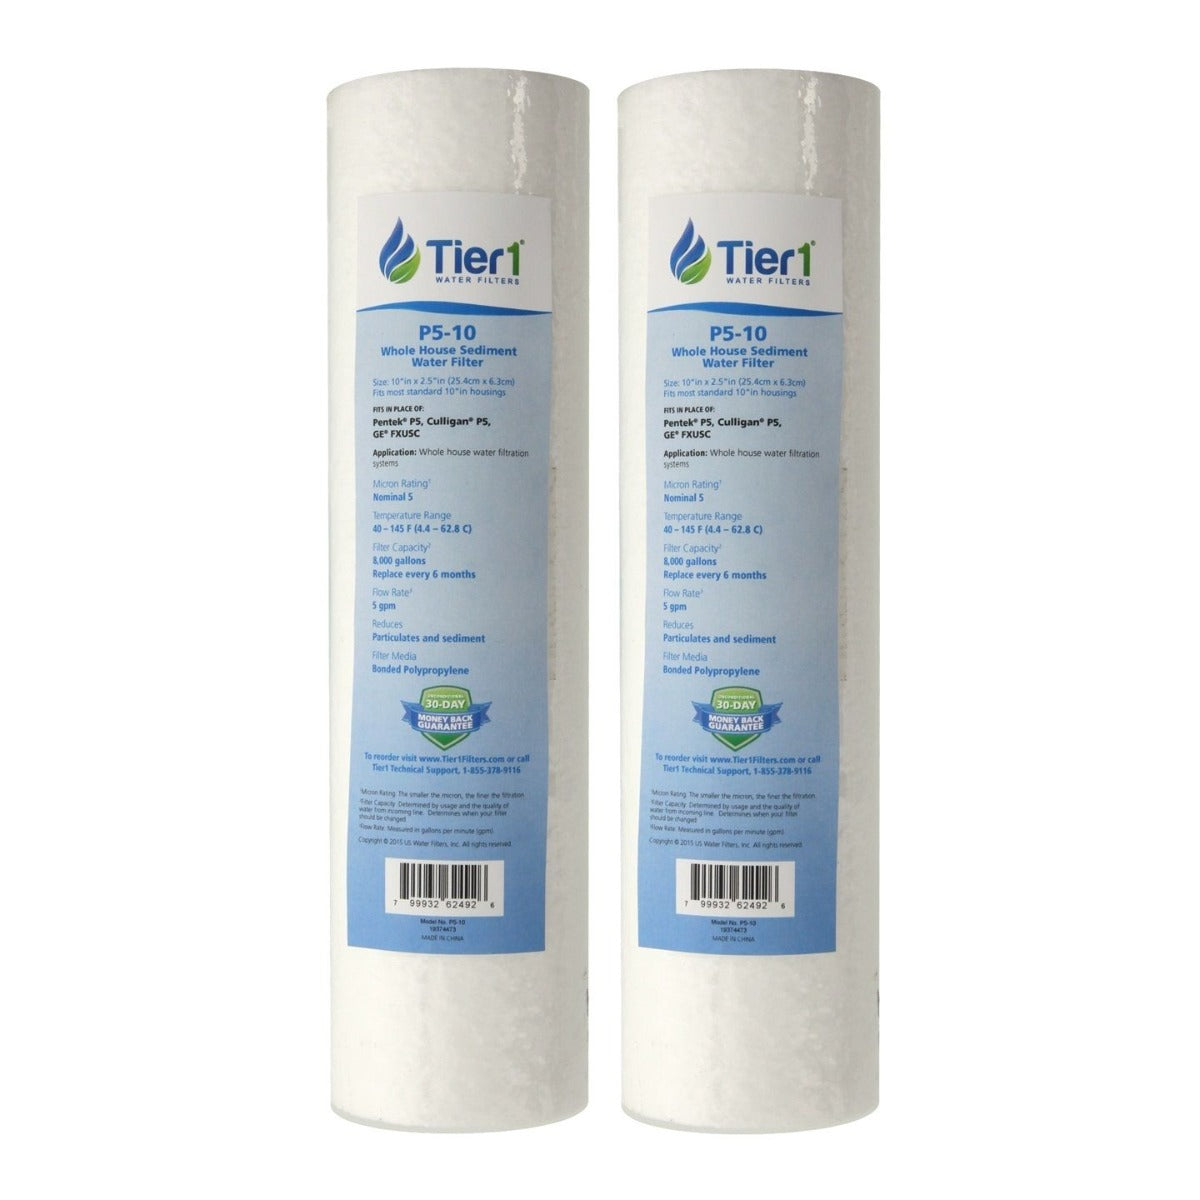 10 X 2.5 Inch 5 micron Polypropylene Replacement Filter by Tier1